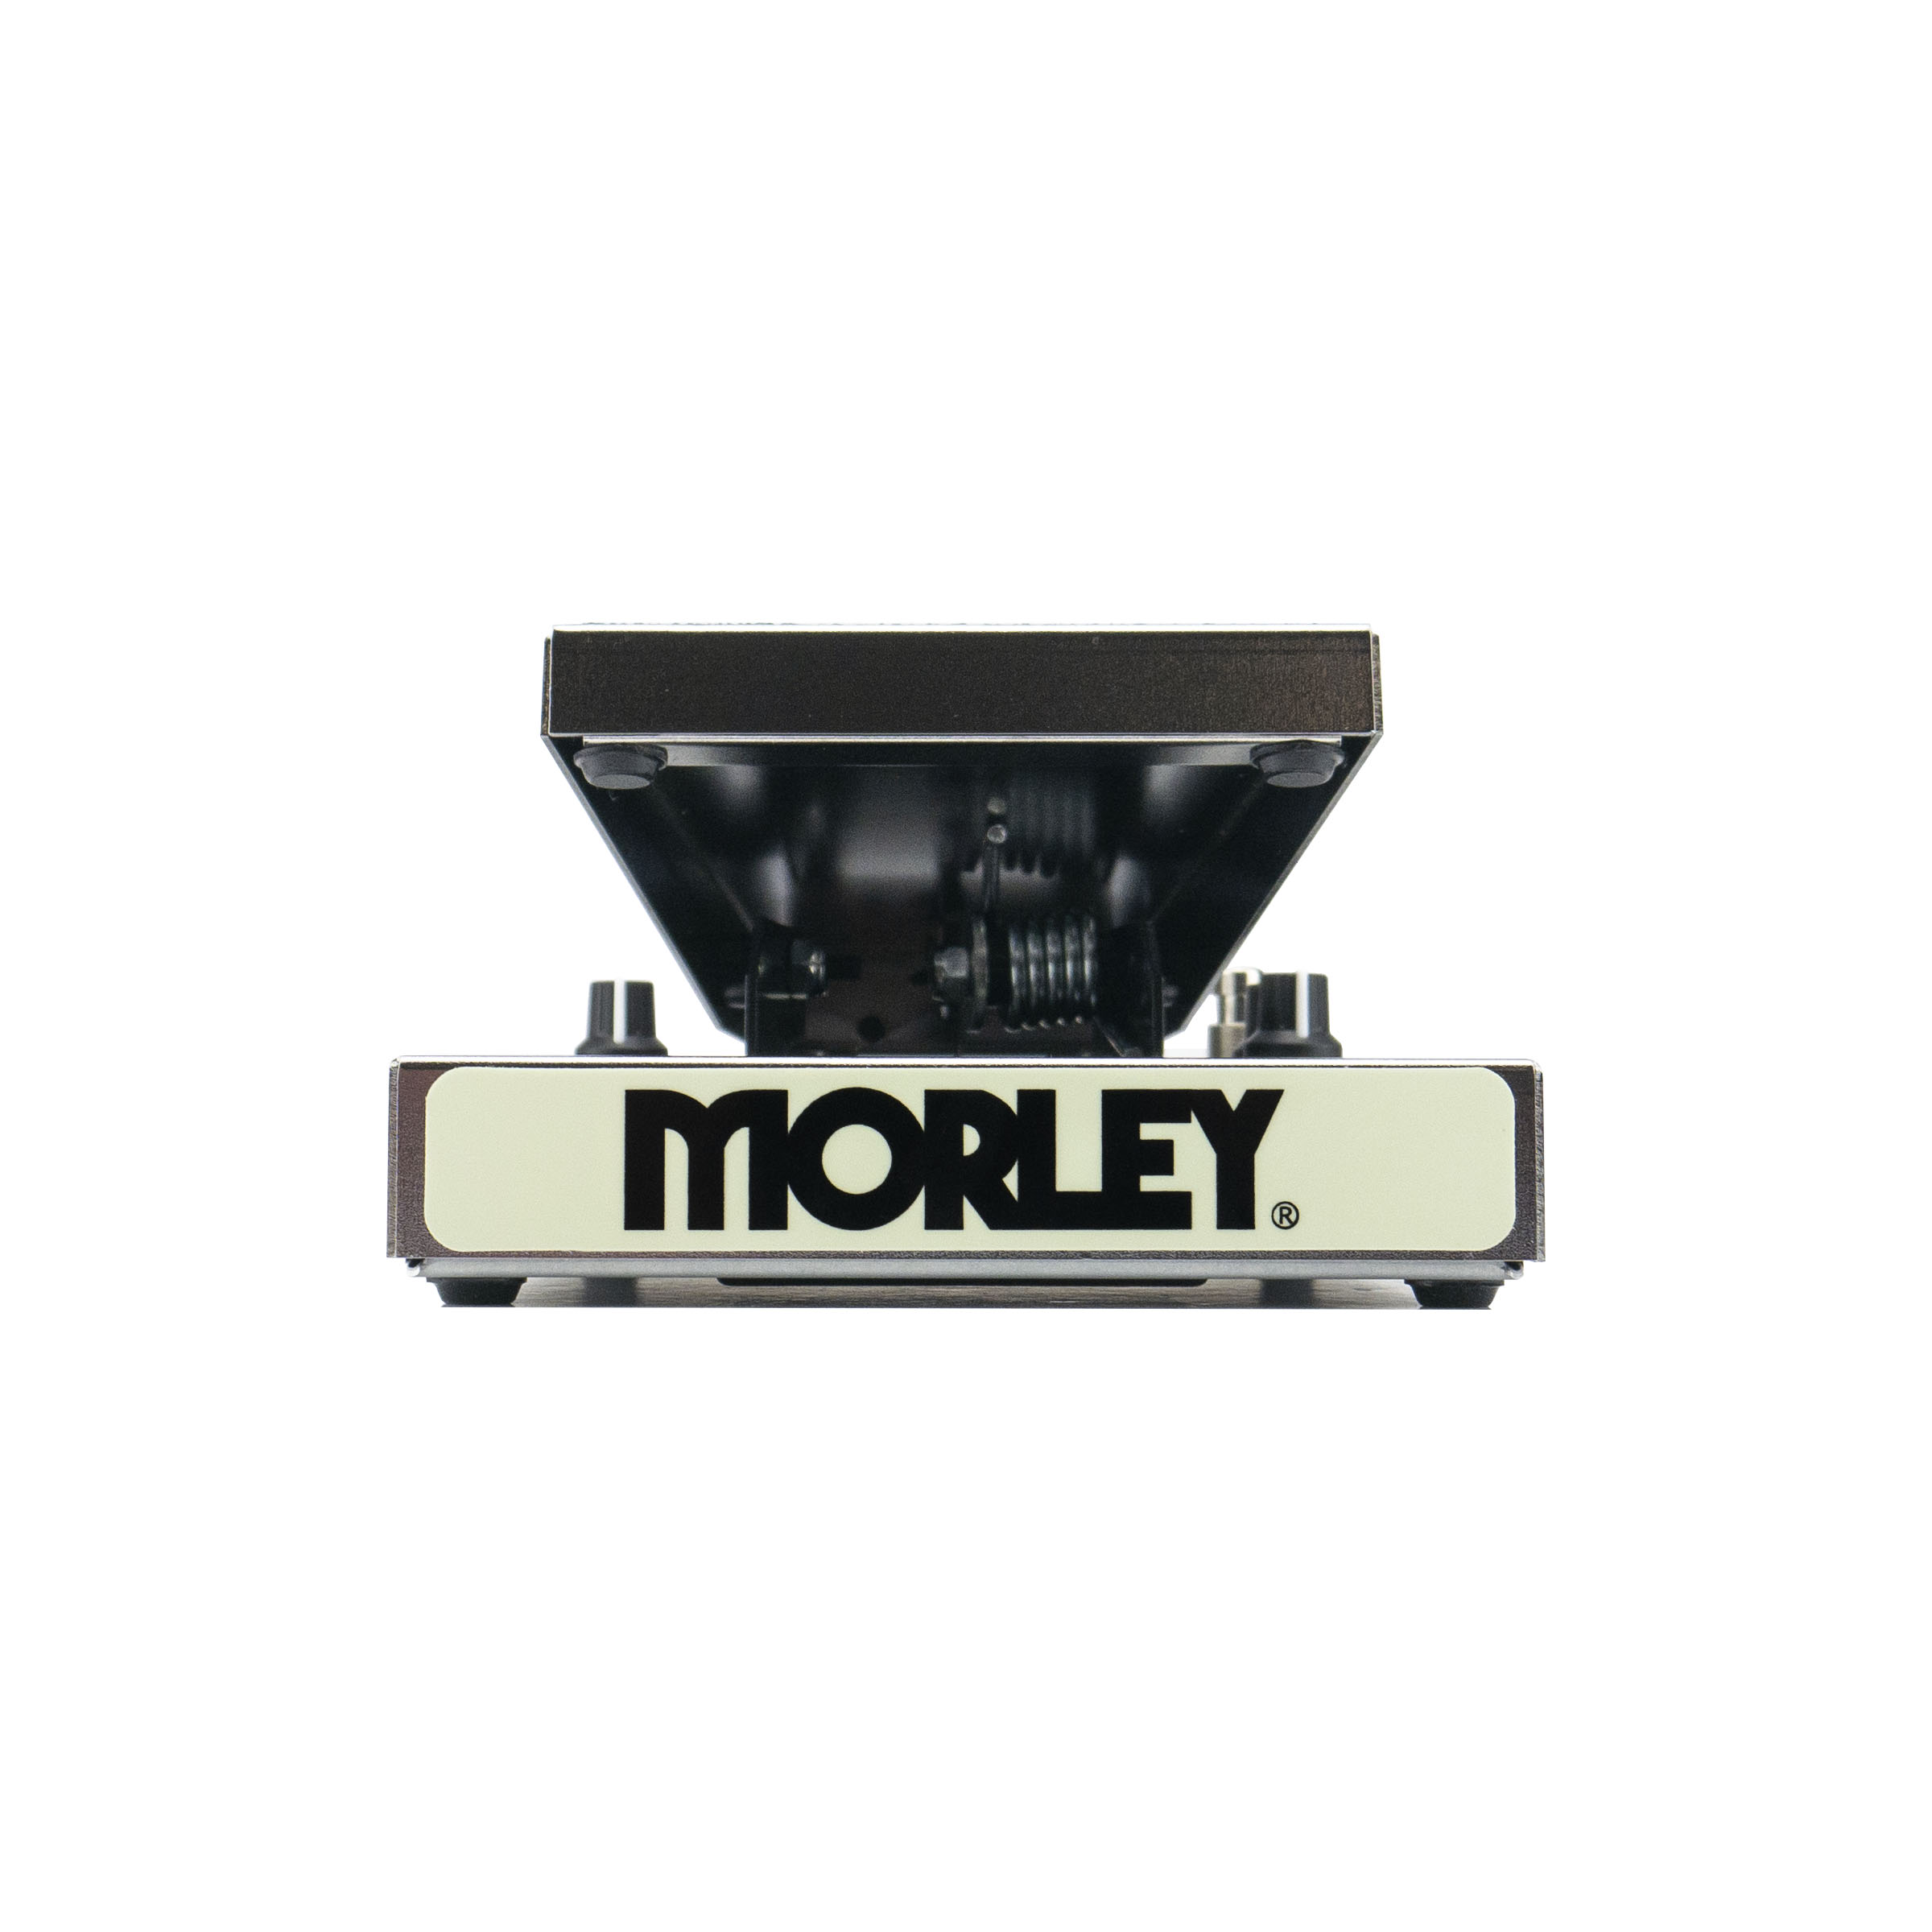 Morley Cliff Burton Tribute Series Power Wah Fuzz - Wah & filter effect pedal for bass - Variation 1